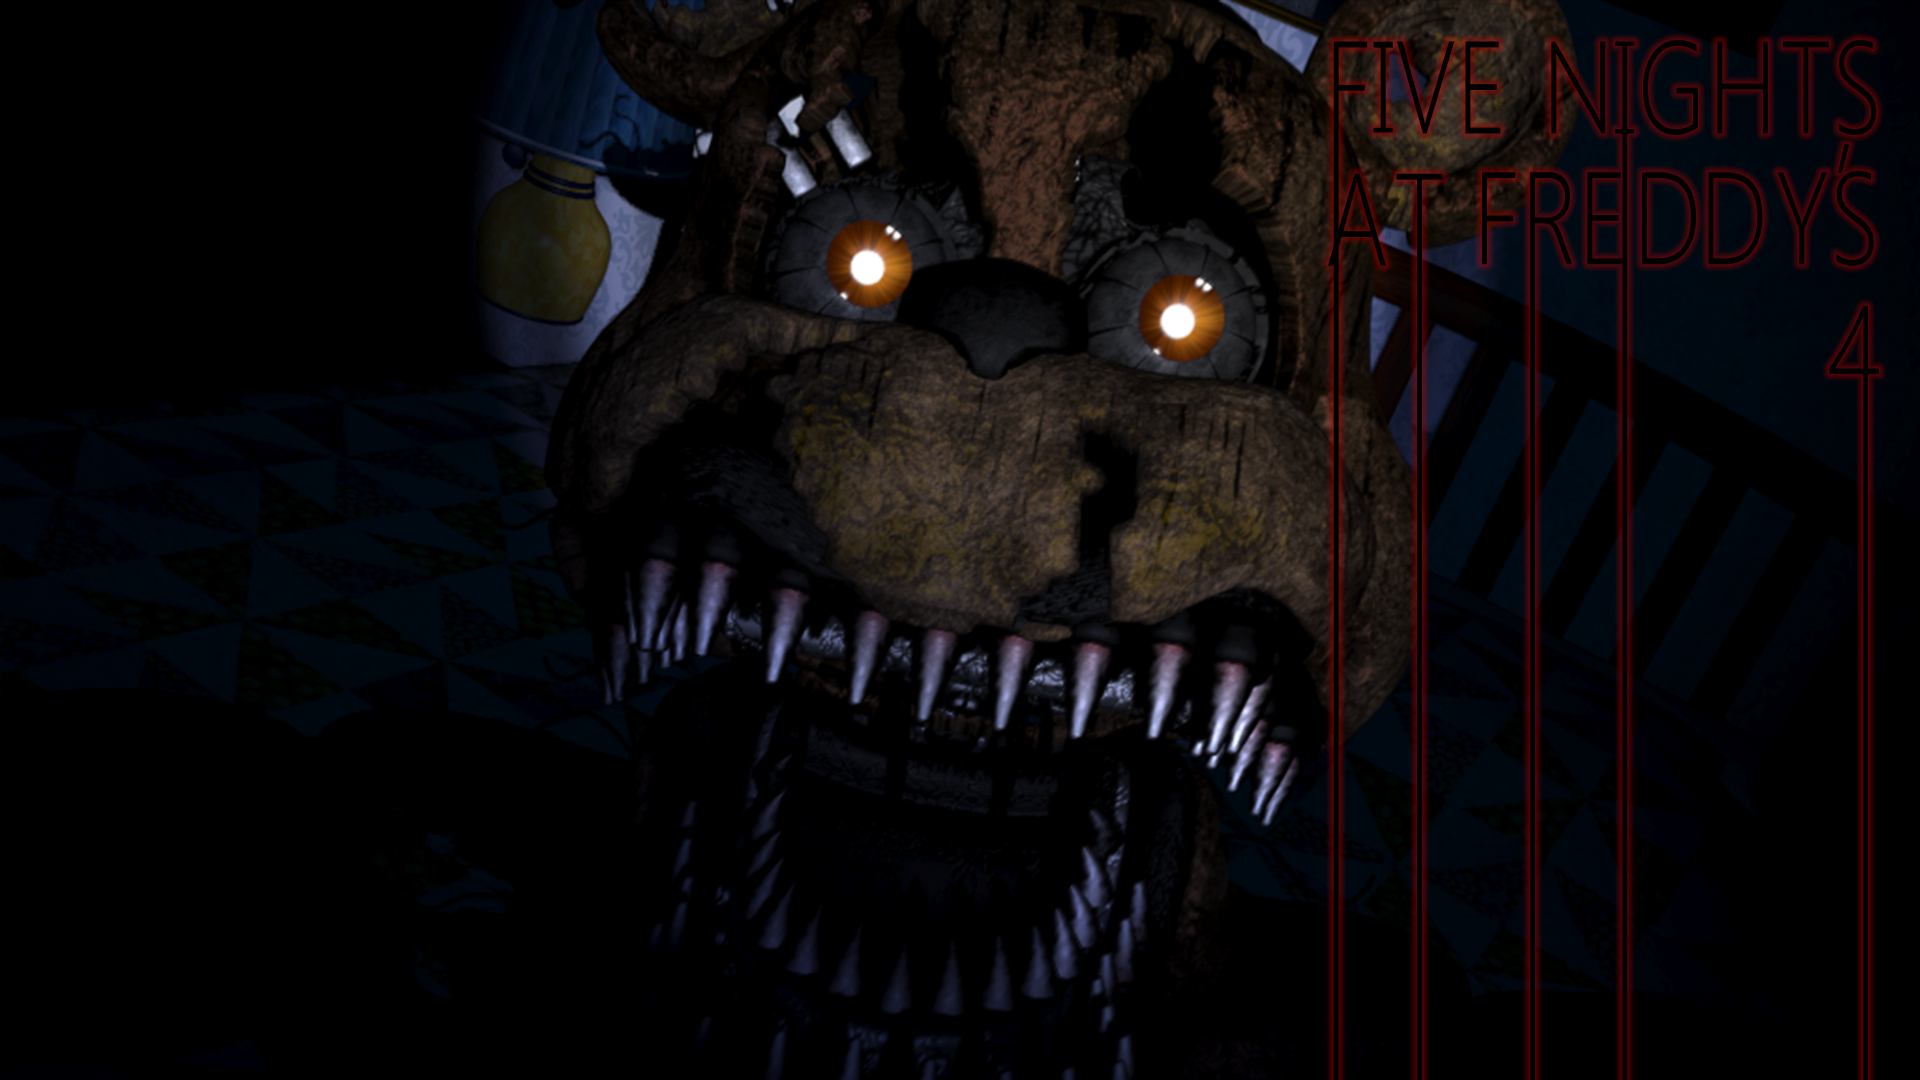 Icon for Five Nights at Freddy's